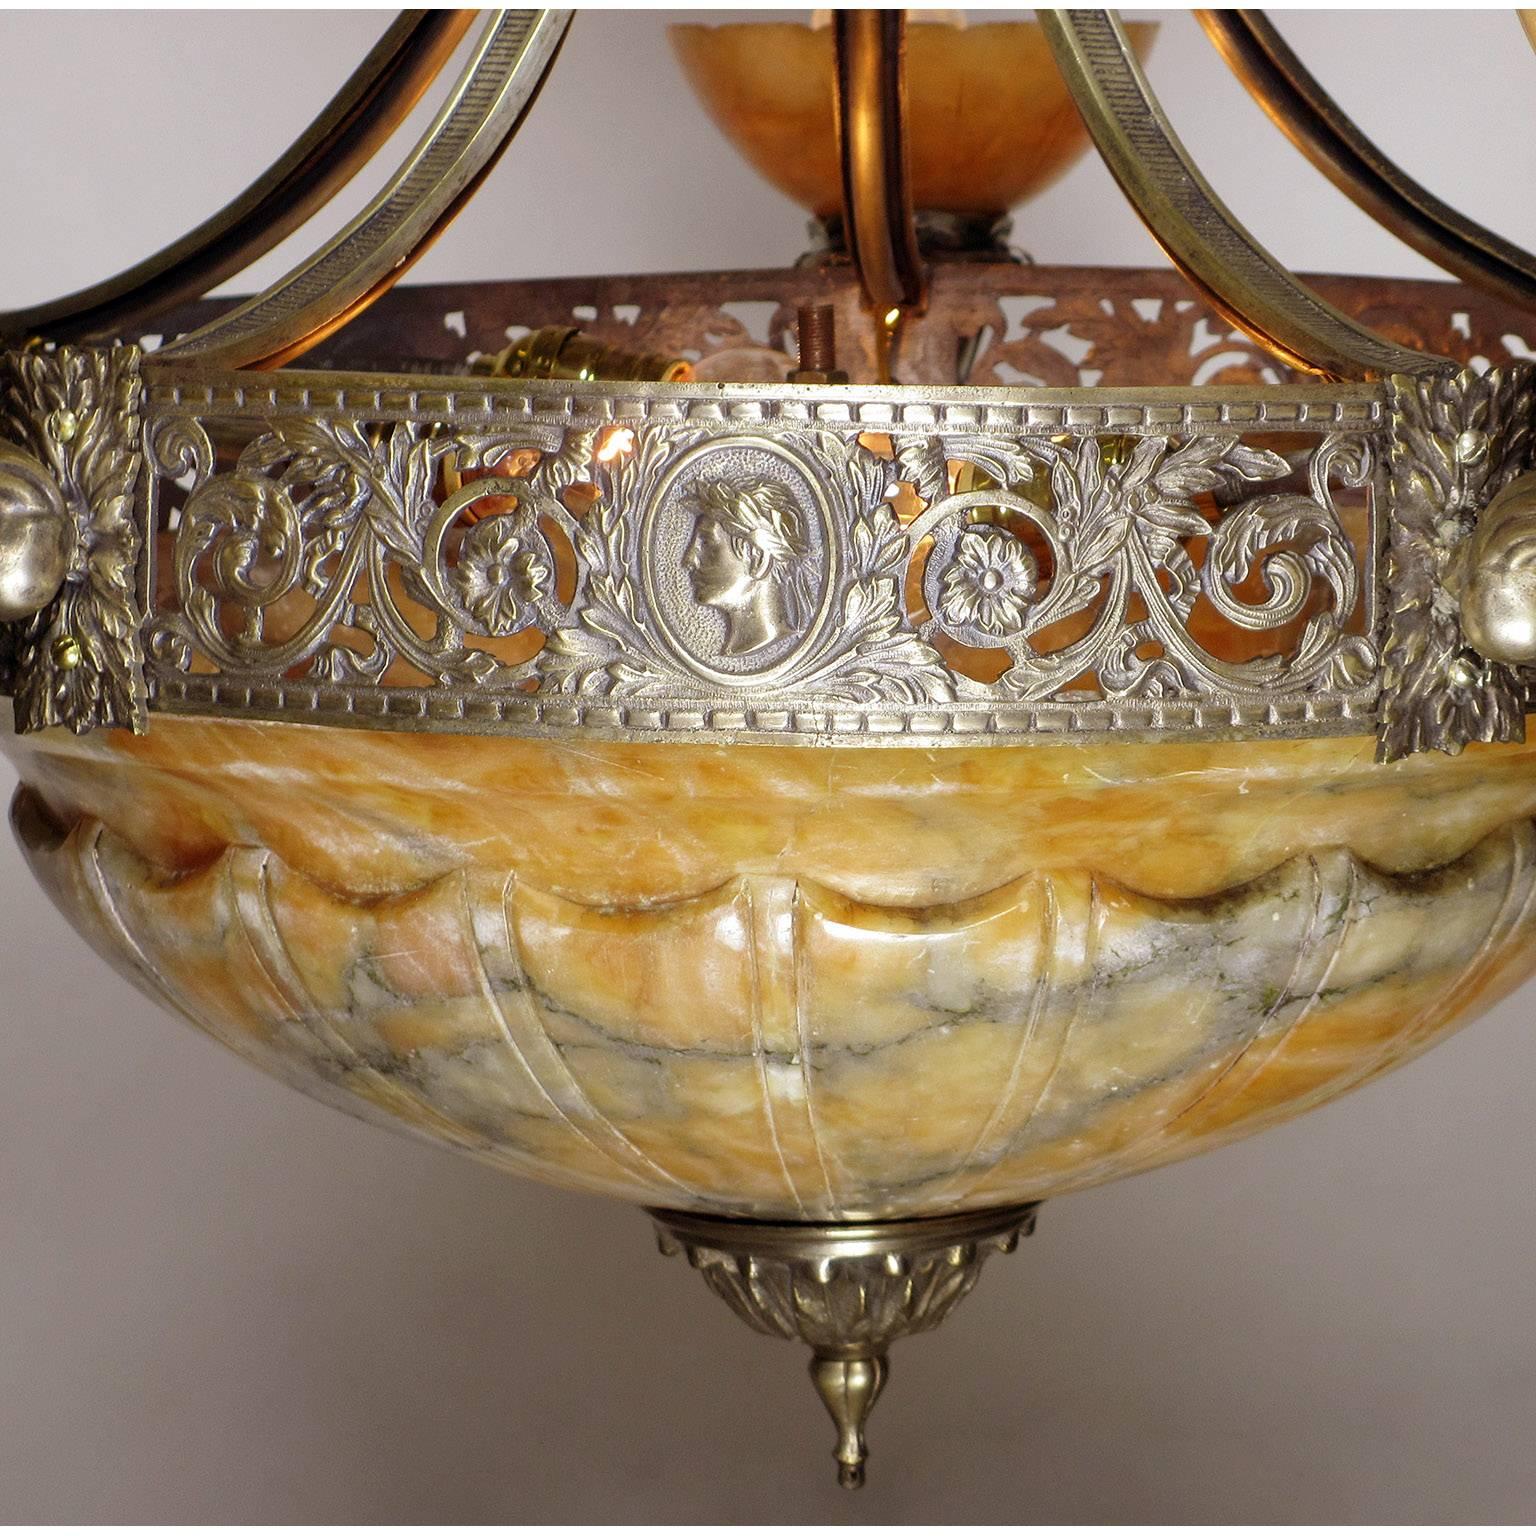 An Italian early 20th century Art Deco silvered bronze and carved caramel color alabaster five-arm and eight-light figural chandelier. The intricate pierced floral rim with profile busts of Julius Ceasar and surmounted with five cornucopia